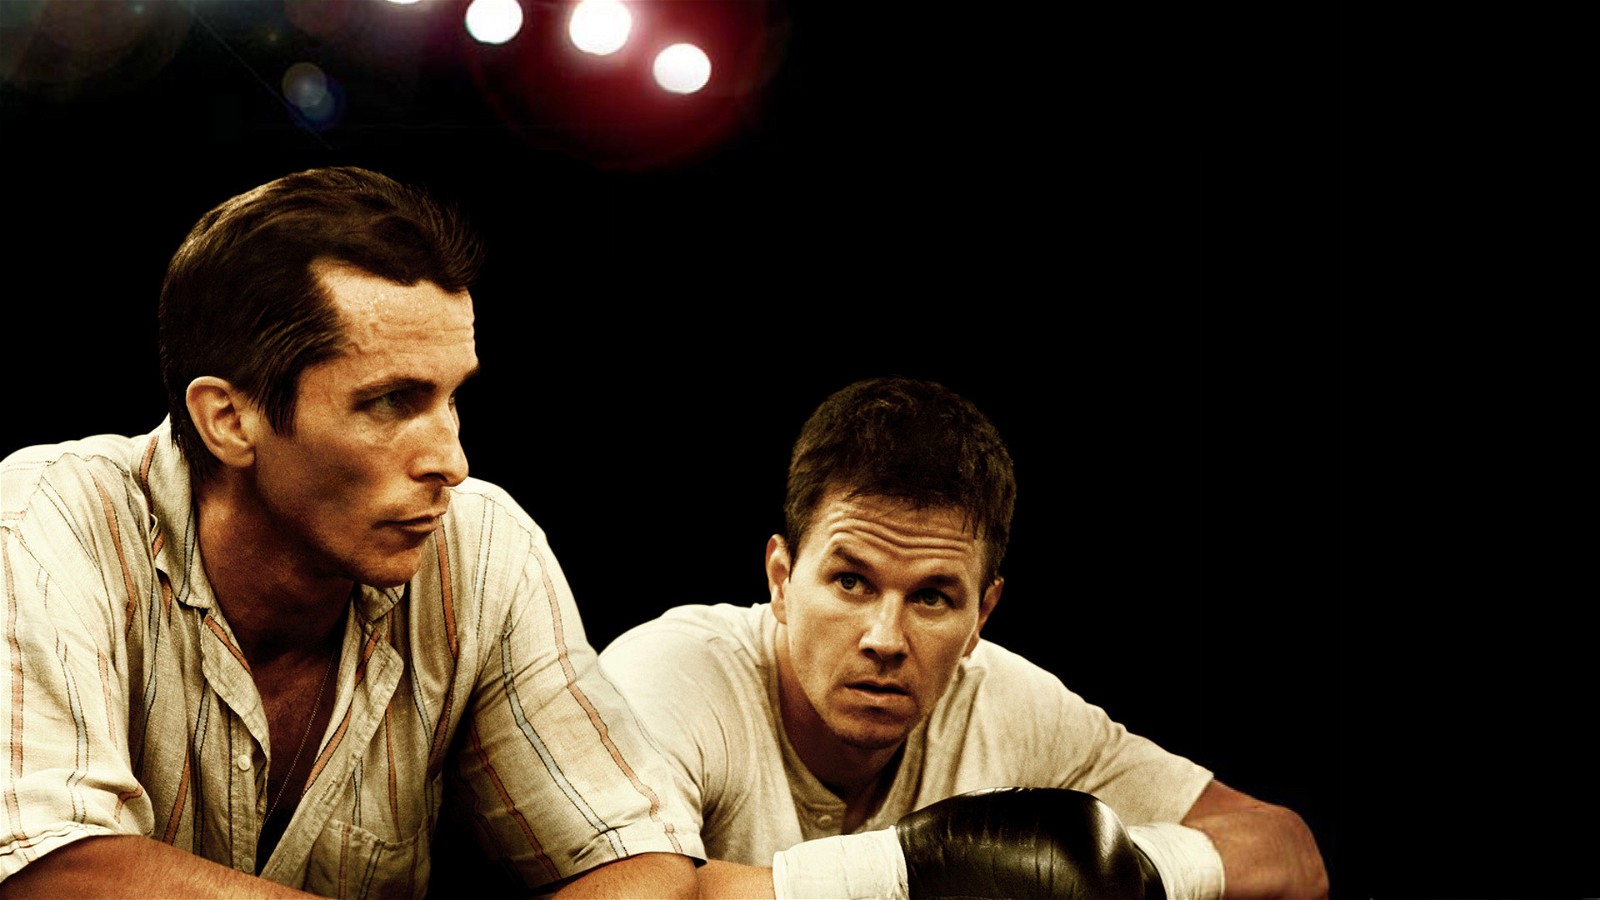 Mark Wahlberg and Christian Bale for The Fighter 